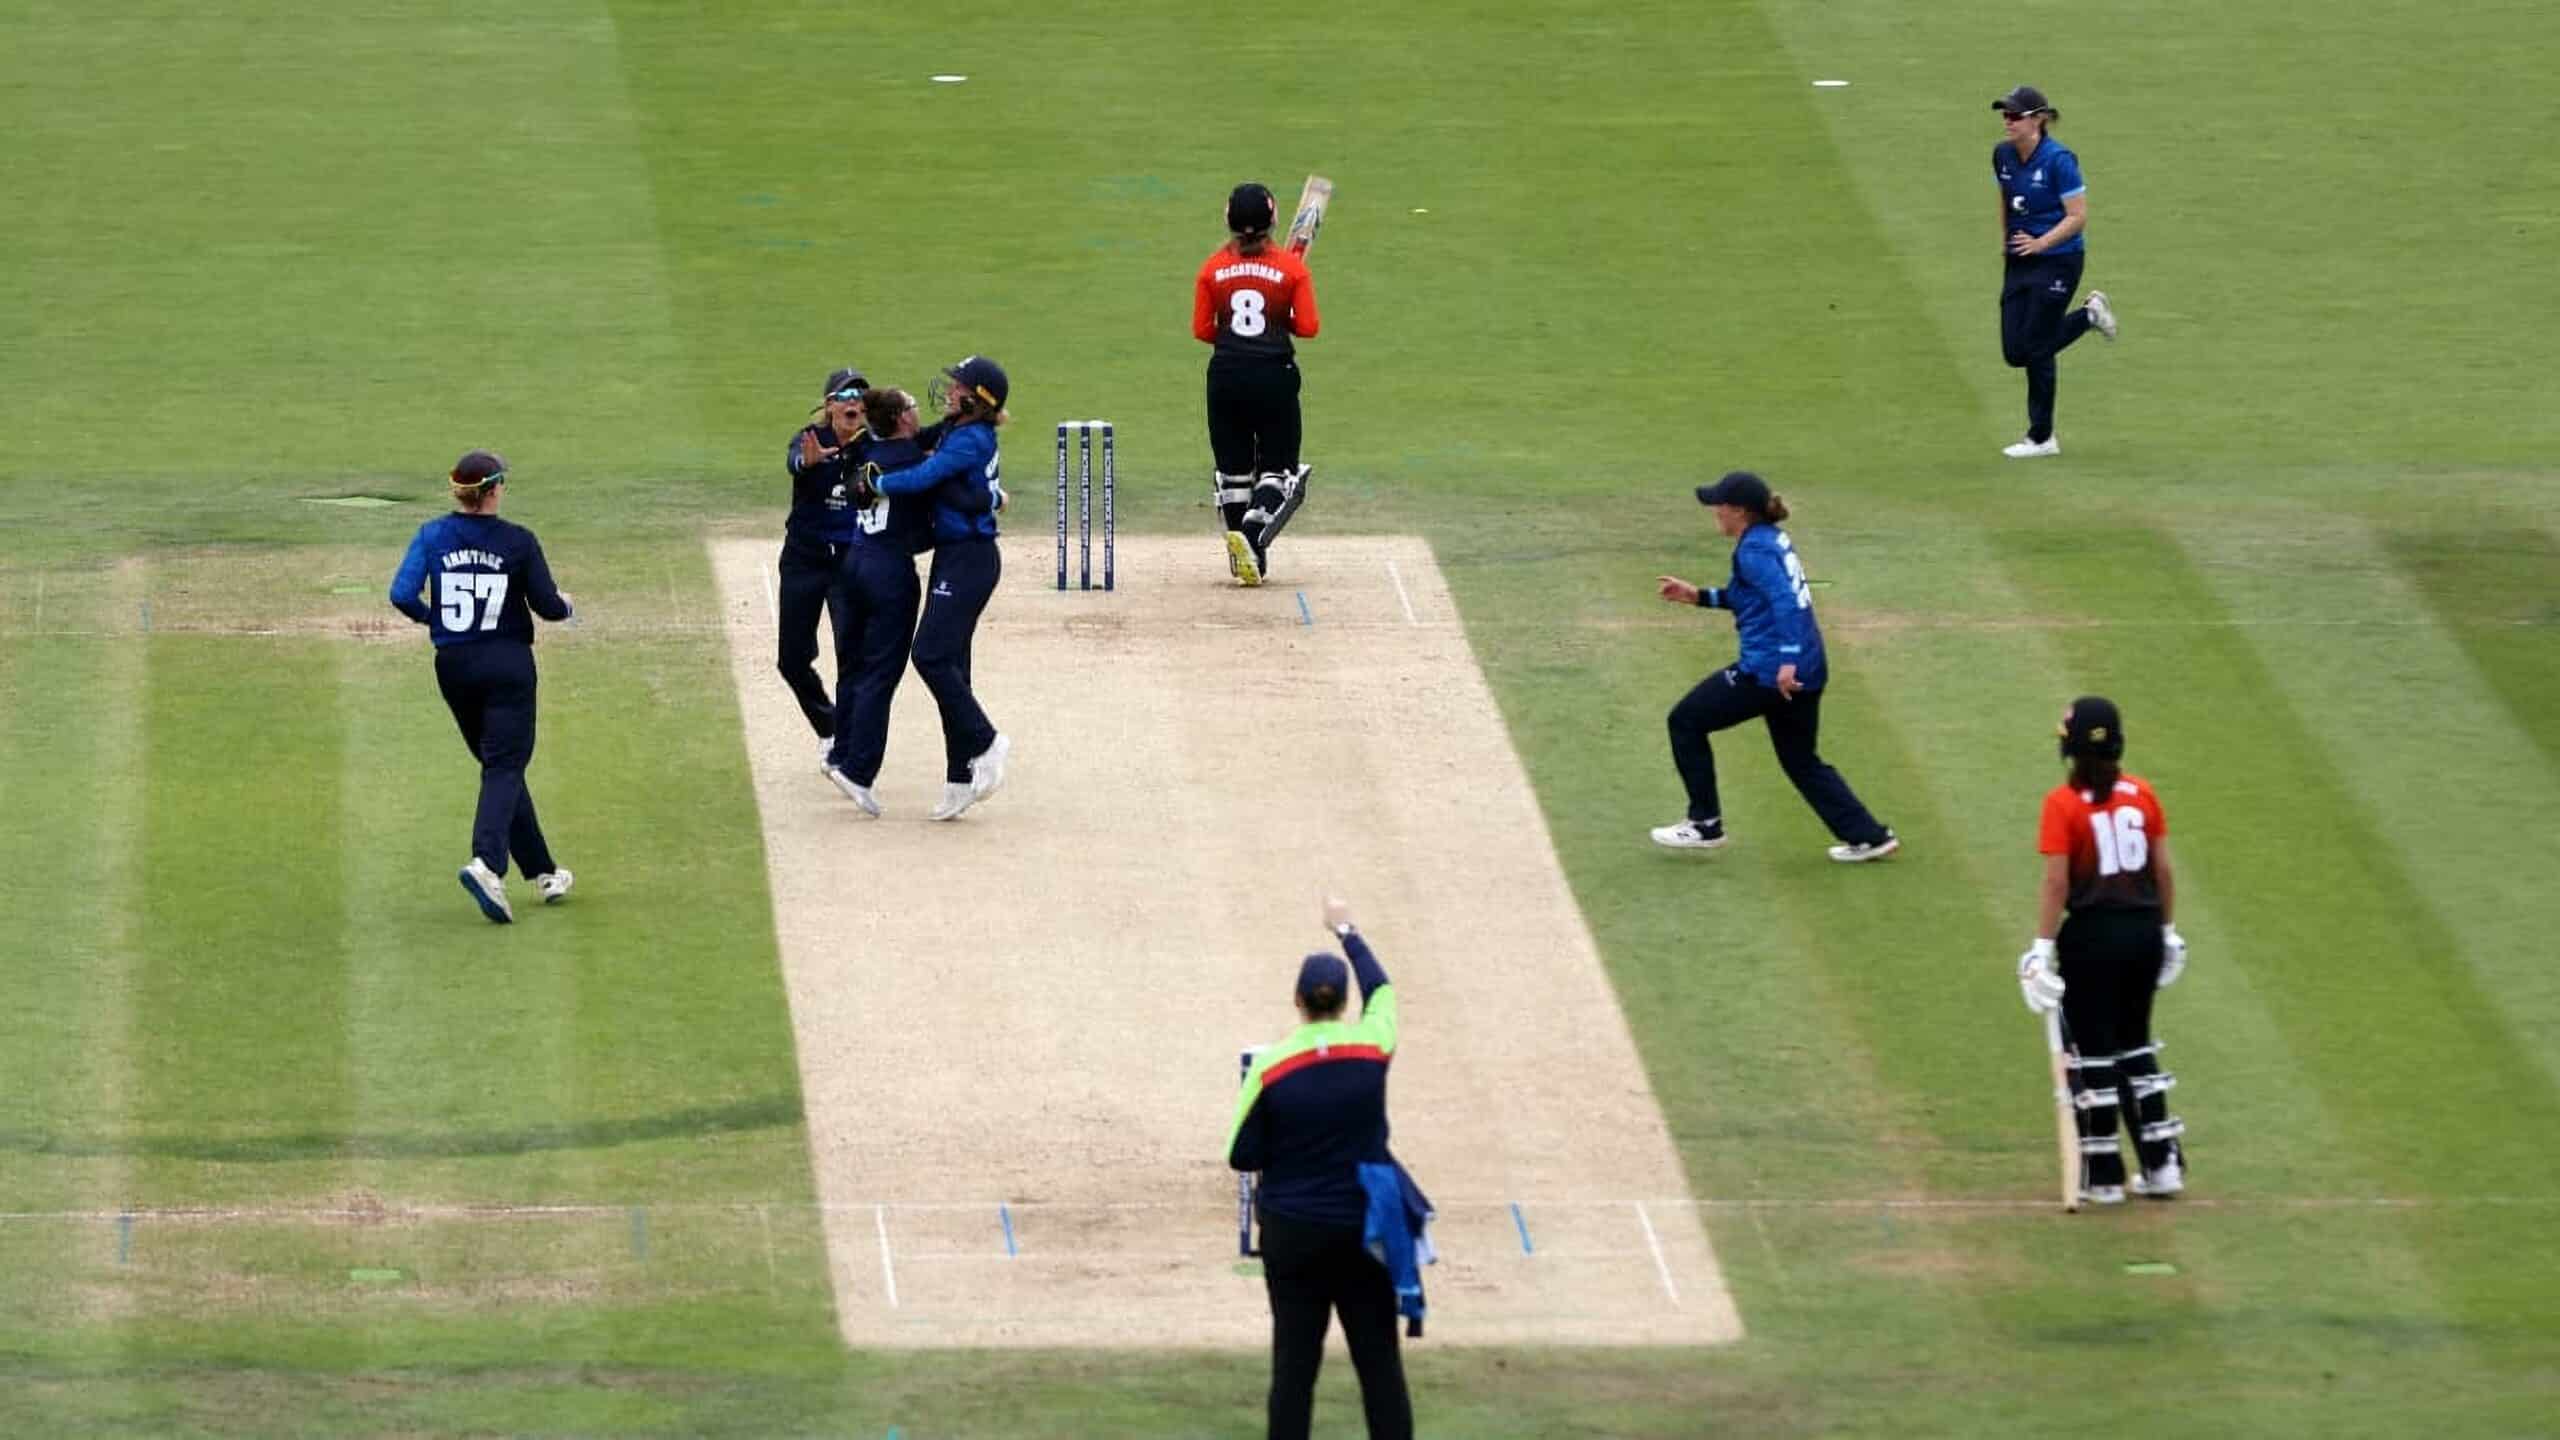 The ecb increase funding for the professional women’s domestic game